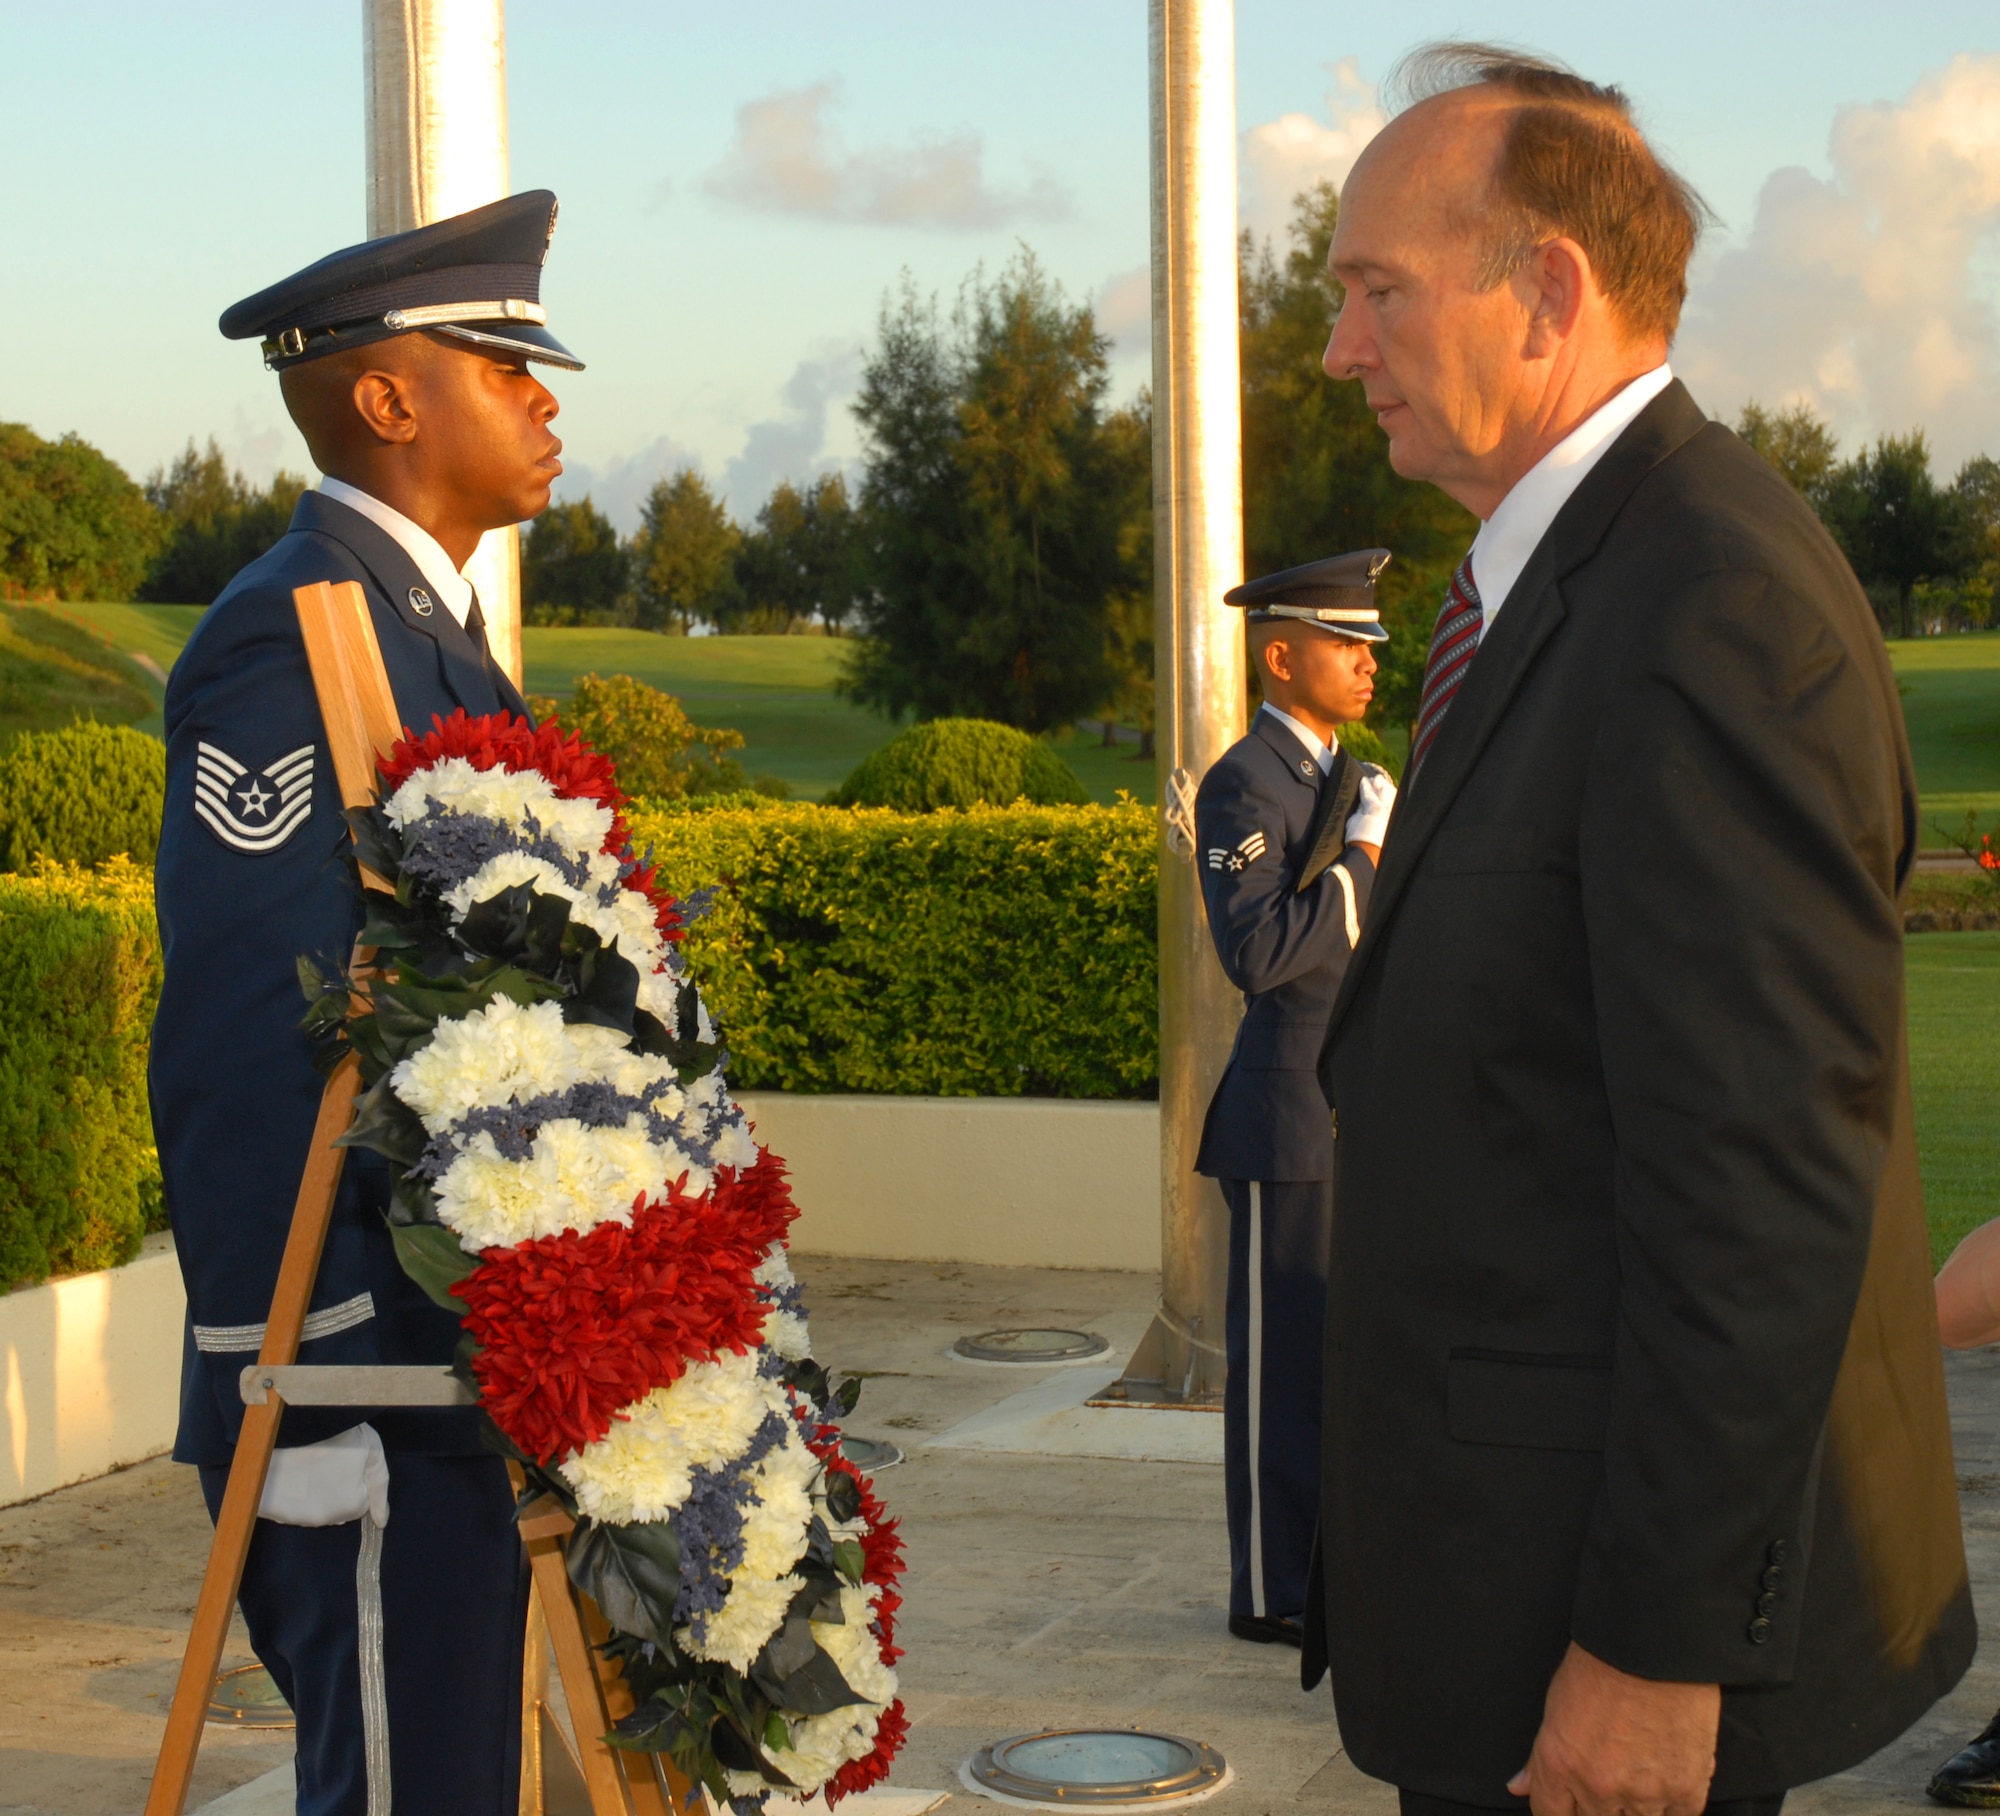 Retired U.S. Air Force Capt. Guy Gruters admires the ceremonial wreath during the annual POW/MIA Memorial Ceremony at Kadena Air Base, Japan Sept. 19, 2008. Gruters was held captive for over five years during the Vietnam War after his F100-F was shot down over North Vietnam in 1967. (U.S. Air Force photo/Airman 1st Class Chad Warren)